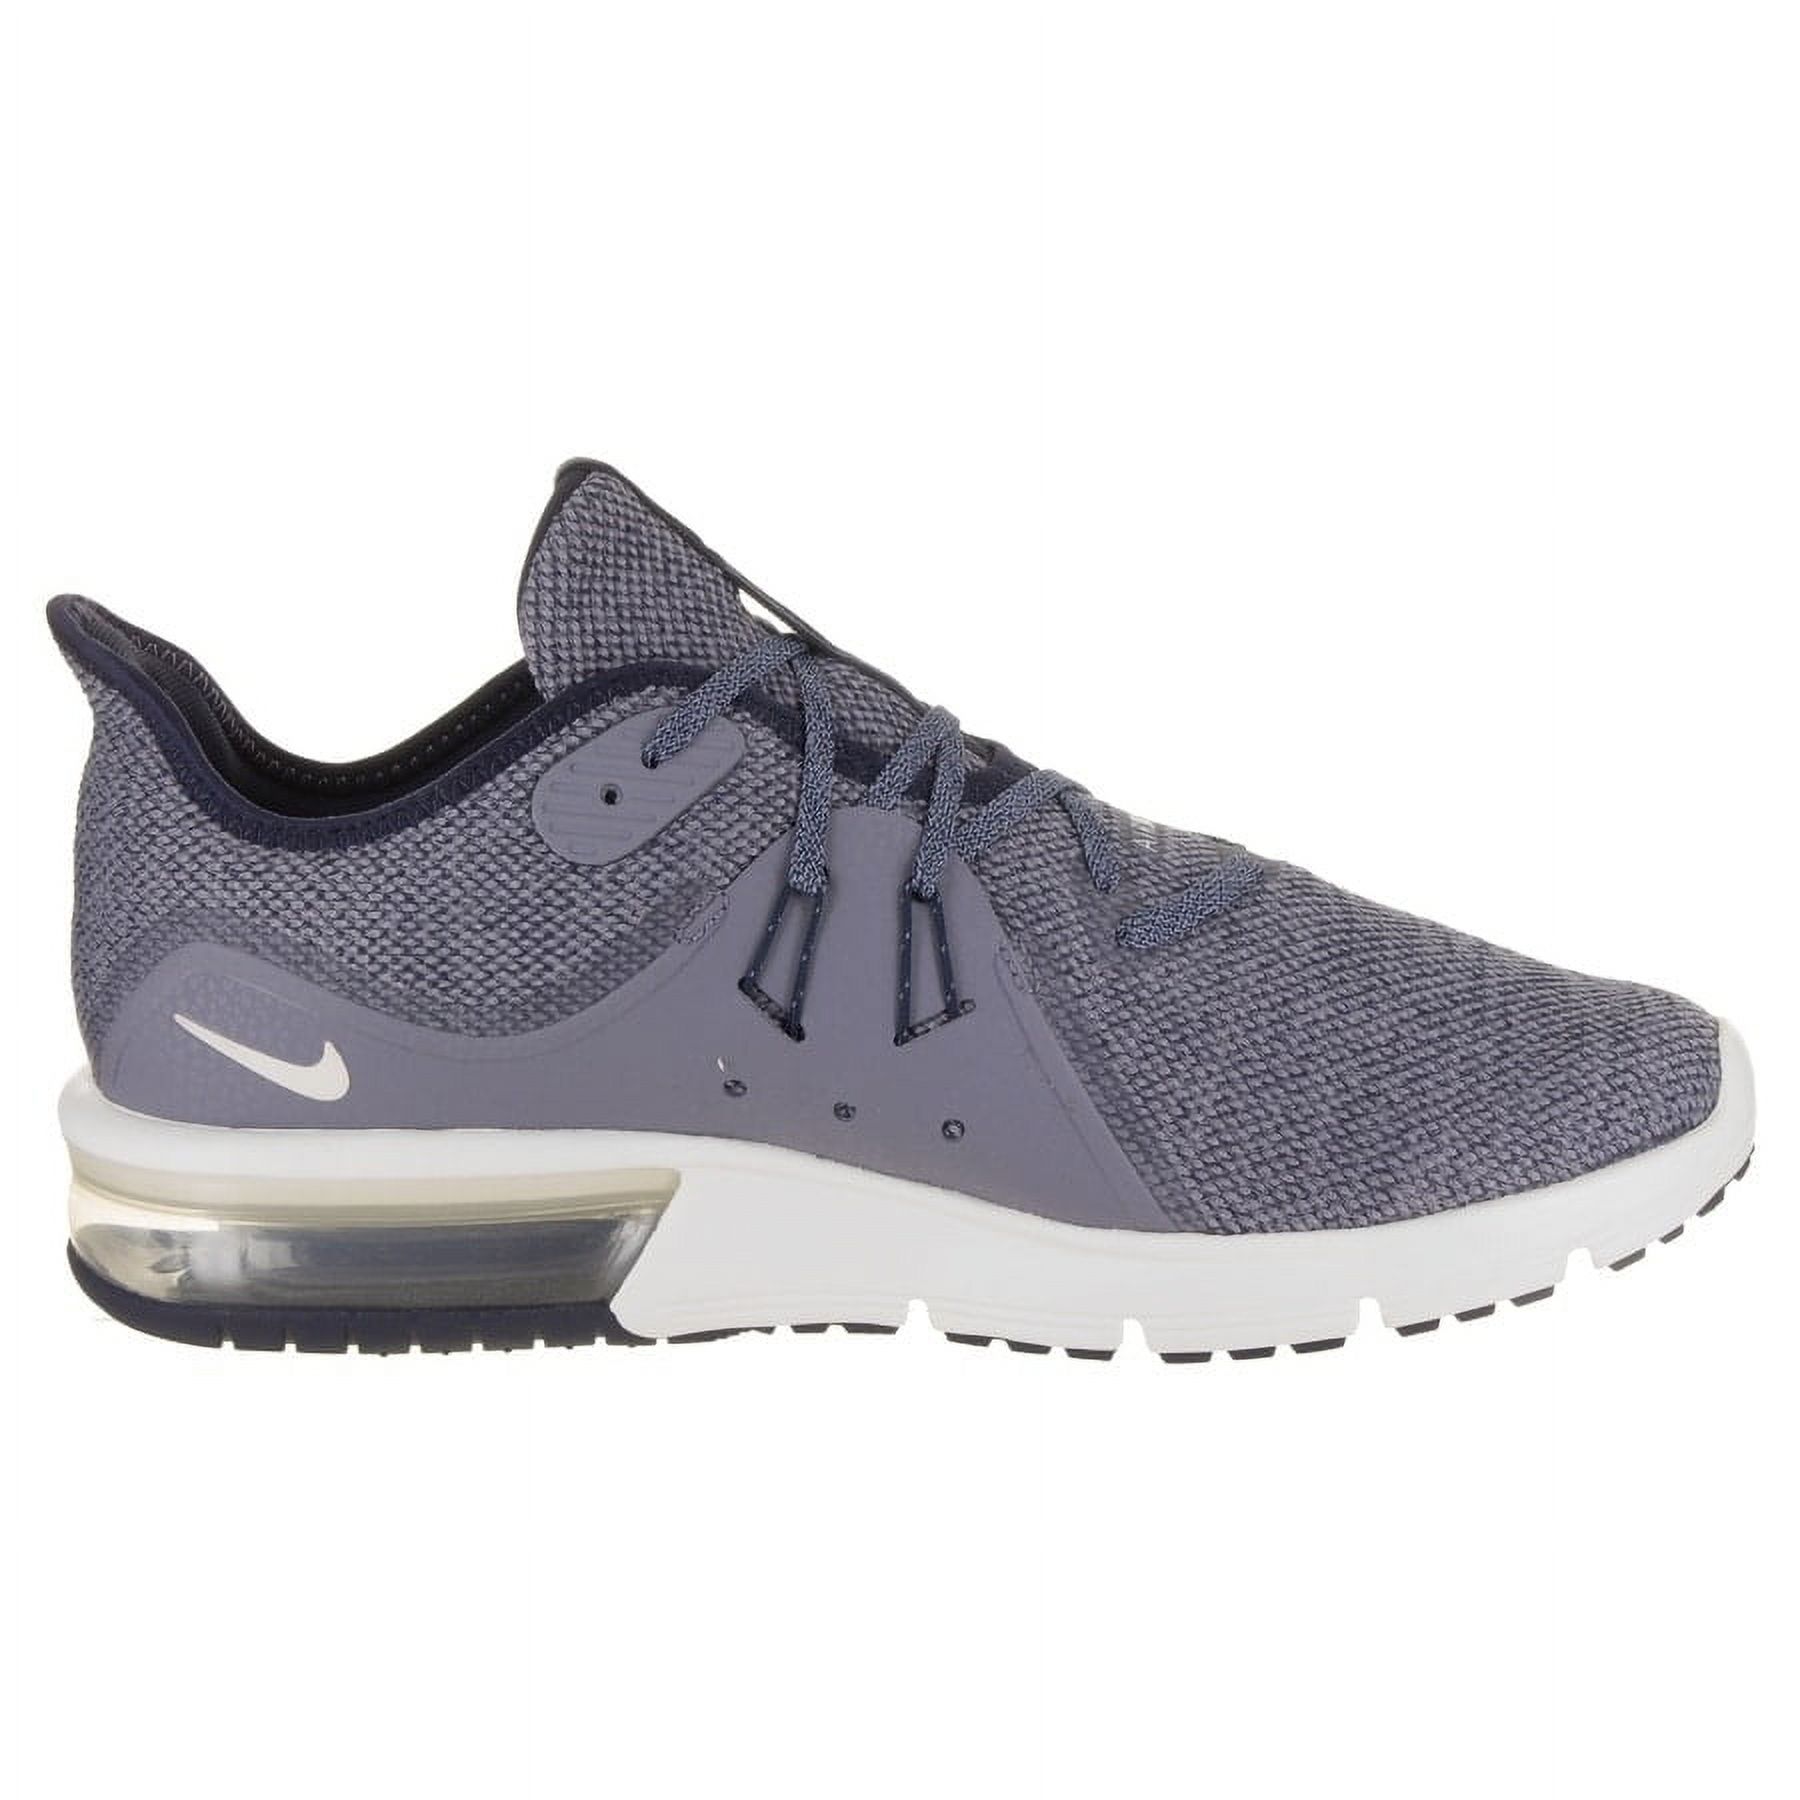 Nike Men's Air Max Sequent 3 Running Shoe - image 3 of 5